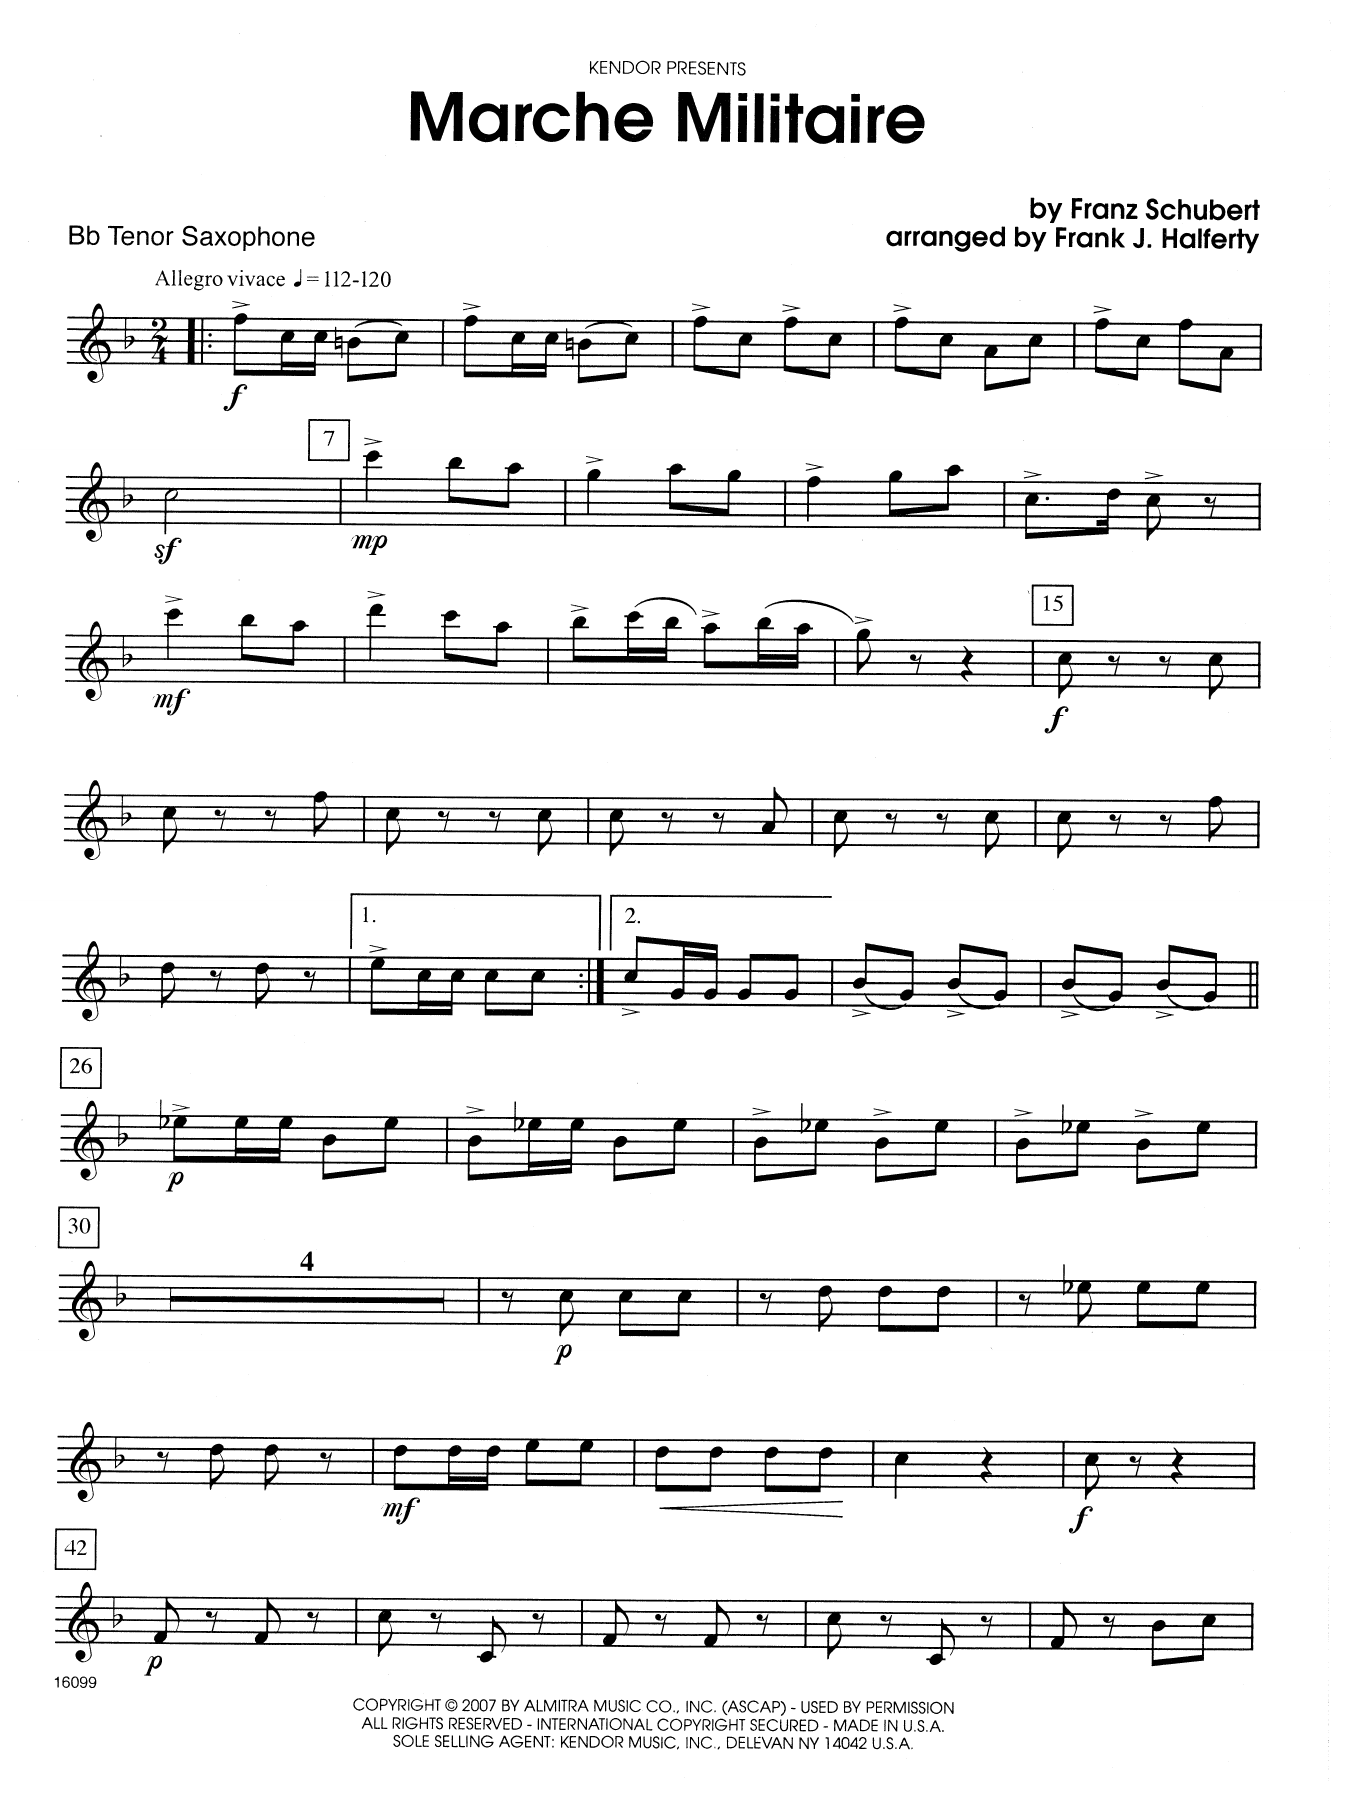 Frank J. Halferty Marche Militaire - Bb Tenor Saxophone sheet music notes and chords. Download Printable PDF.